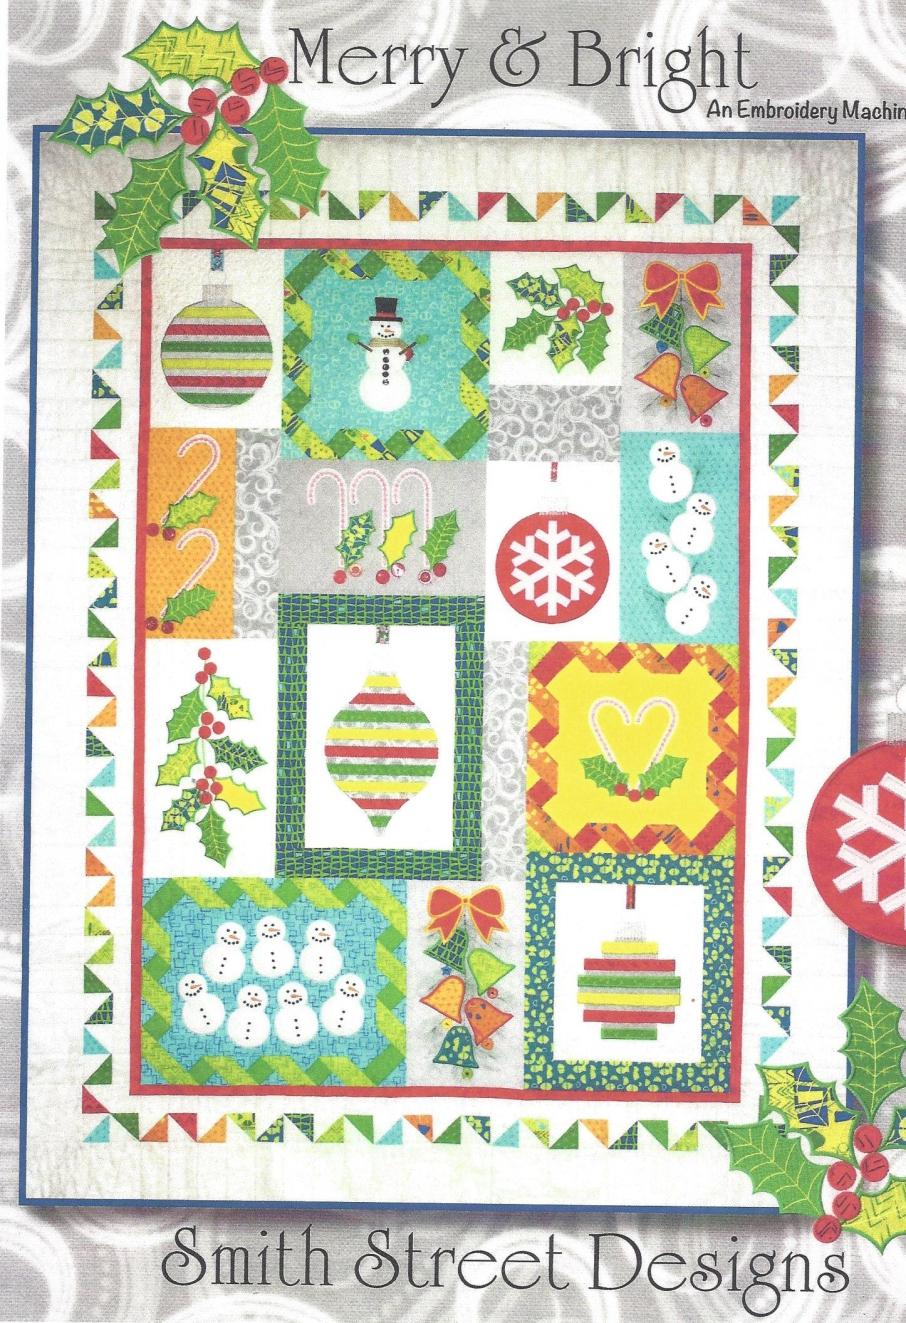 Announcing our new block of the month Bright by Smith Street Make this stunning Christmas themed quilt to be completed in time